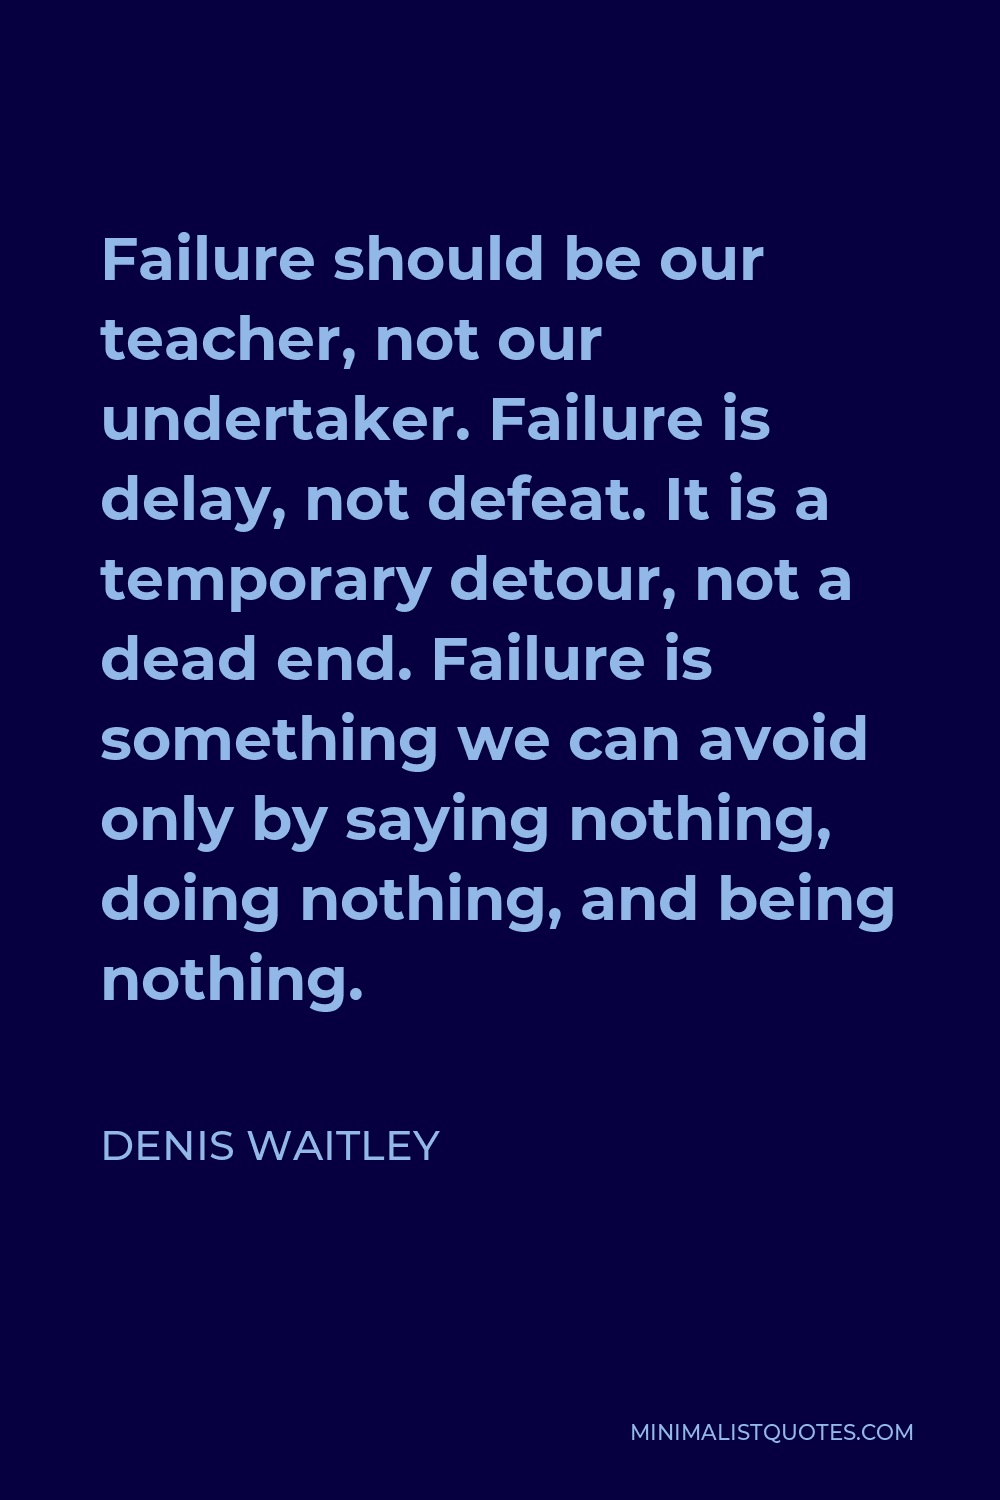 Denis Waitley Quote - Failure should be our teacher, not our undertaker. Failure is delay, not defeat. It is a temporary detour, not a dead end. Failure is something we can avoid only by saying nothing, doing nothing, and being nothing.